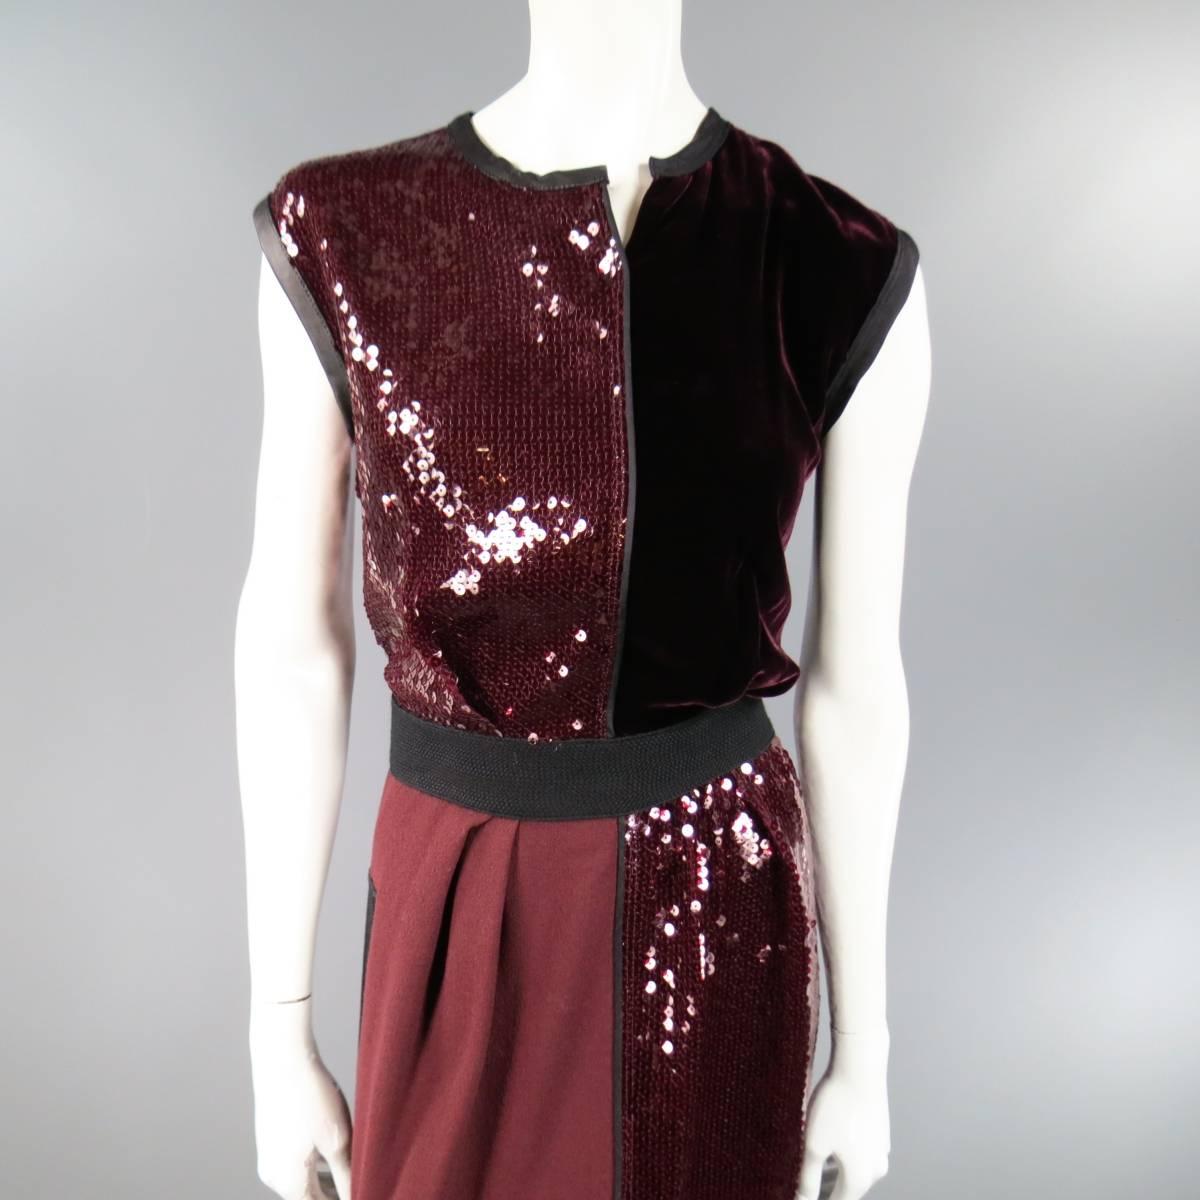 This fabulous MARC JACOBS cocktail dress features patchwork panels of burgundy sequin, velvet, and crepe with black leather trim, woven belt panel, and slit neckline. Made in USA.
 
Excellent Pre-Owned Condition.
Marked: US 4
 
Measurements:
